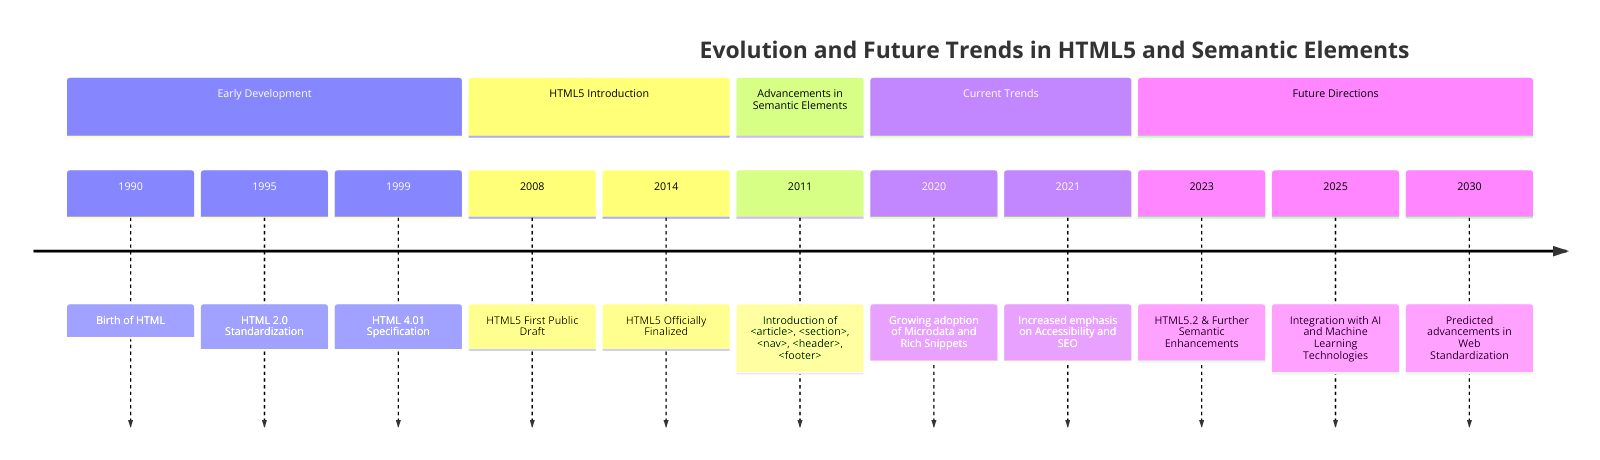 Evolution and Future Trends in HTML5 and Semantic Elements.